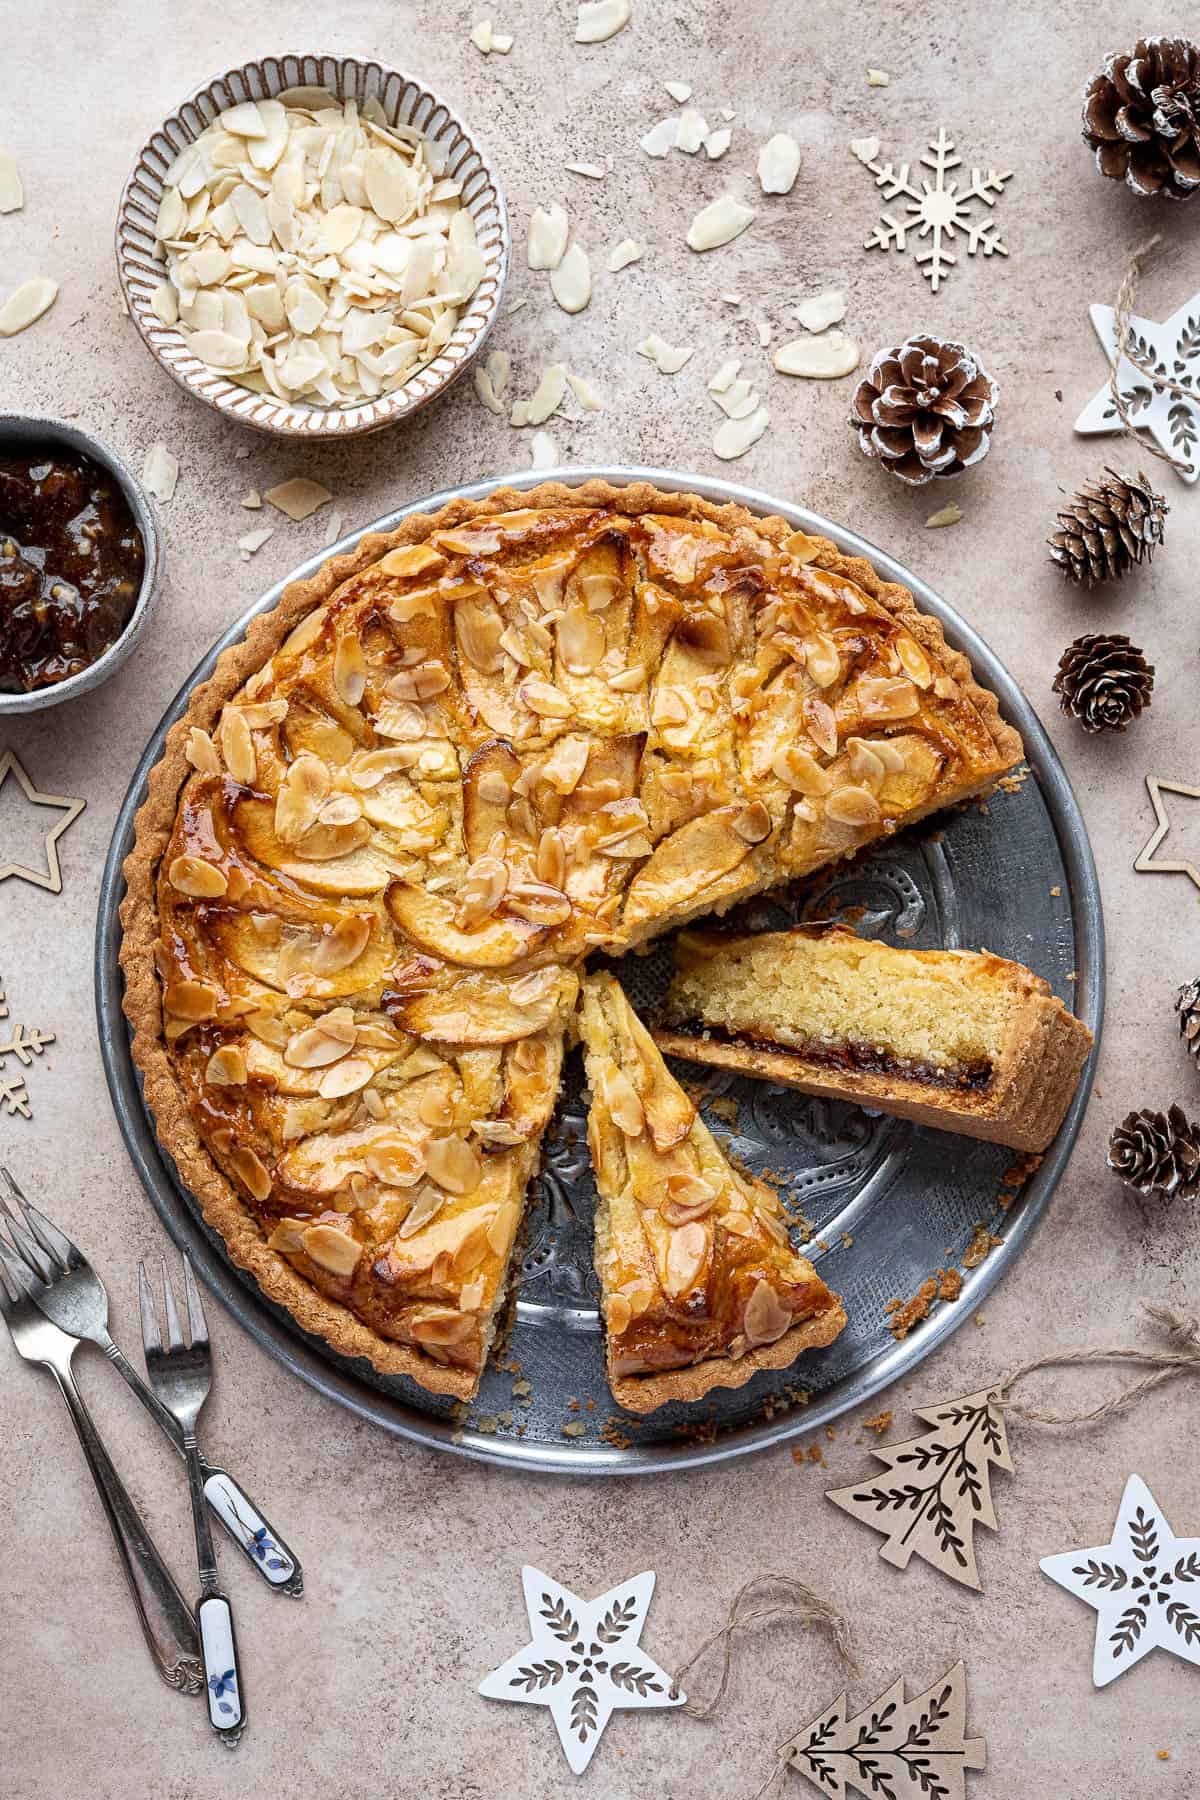 Mincemeat frangipane tart with two slices cut out, surrounded by Christmas decorations an bowls of flaked almonds and mincemeat.